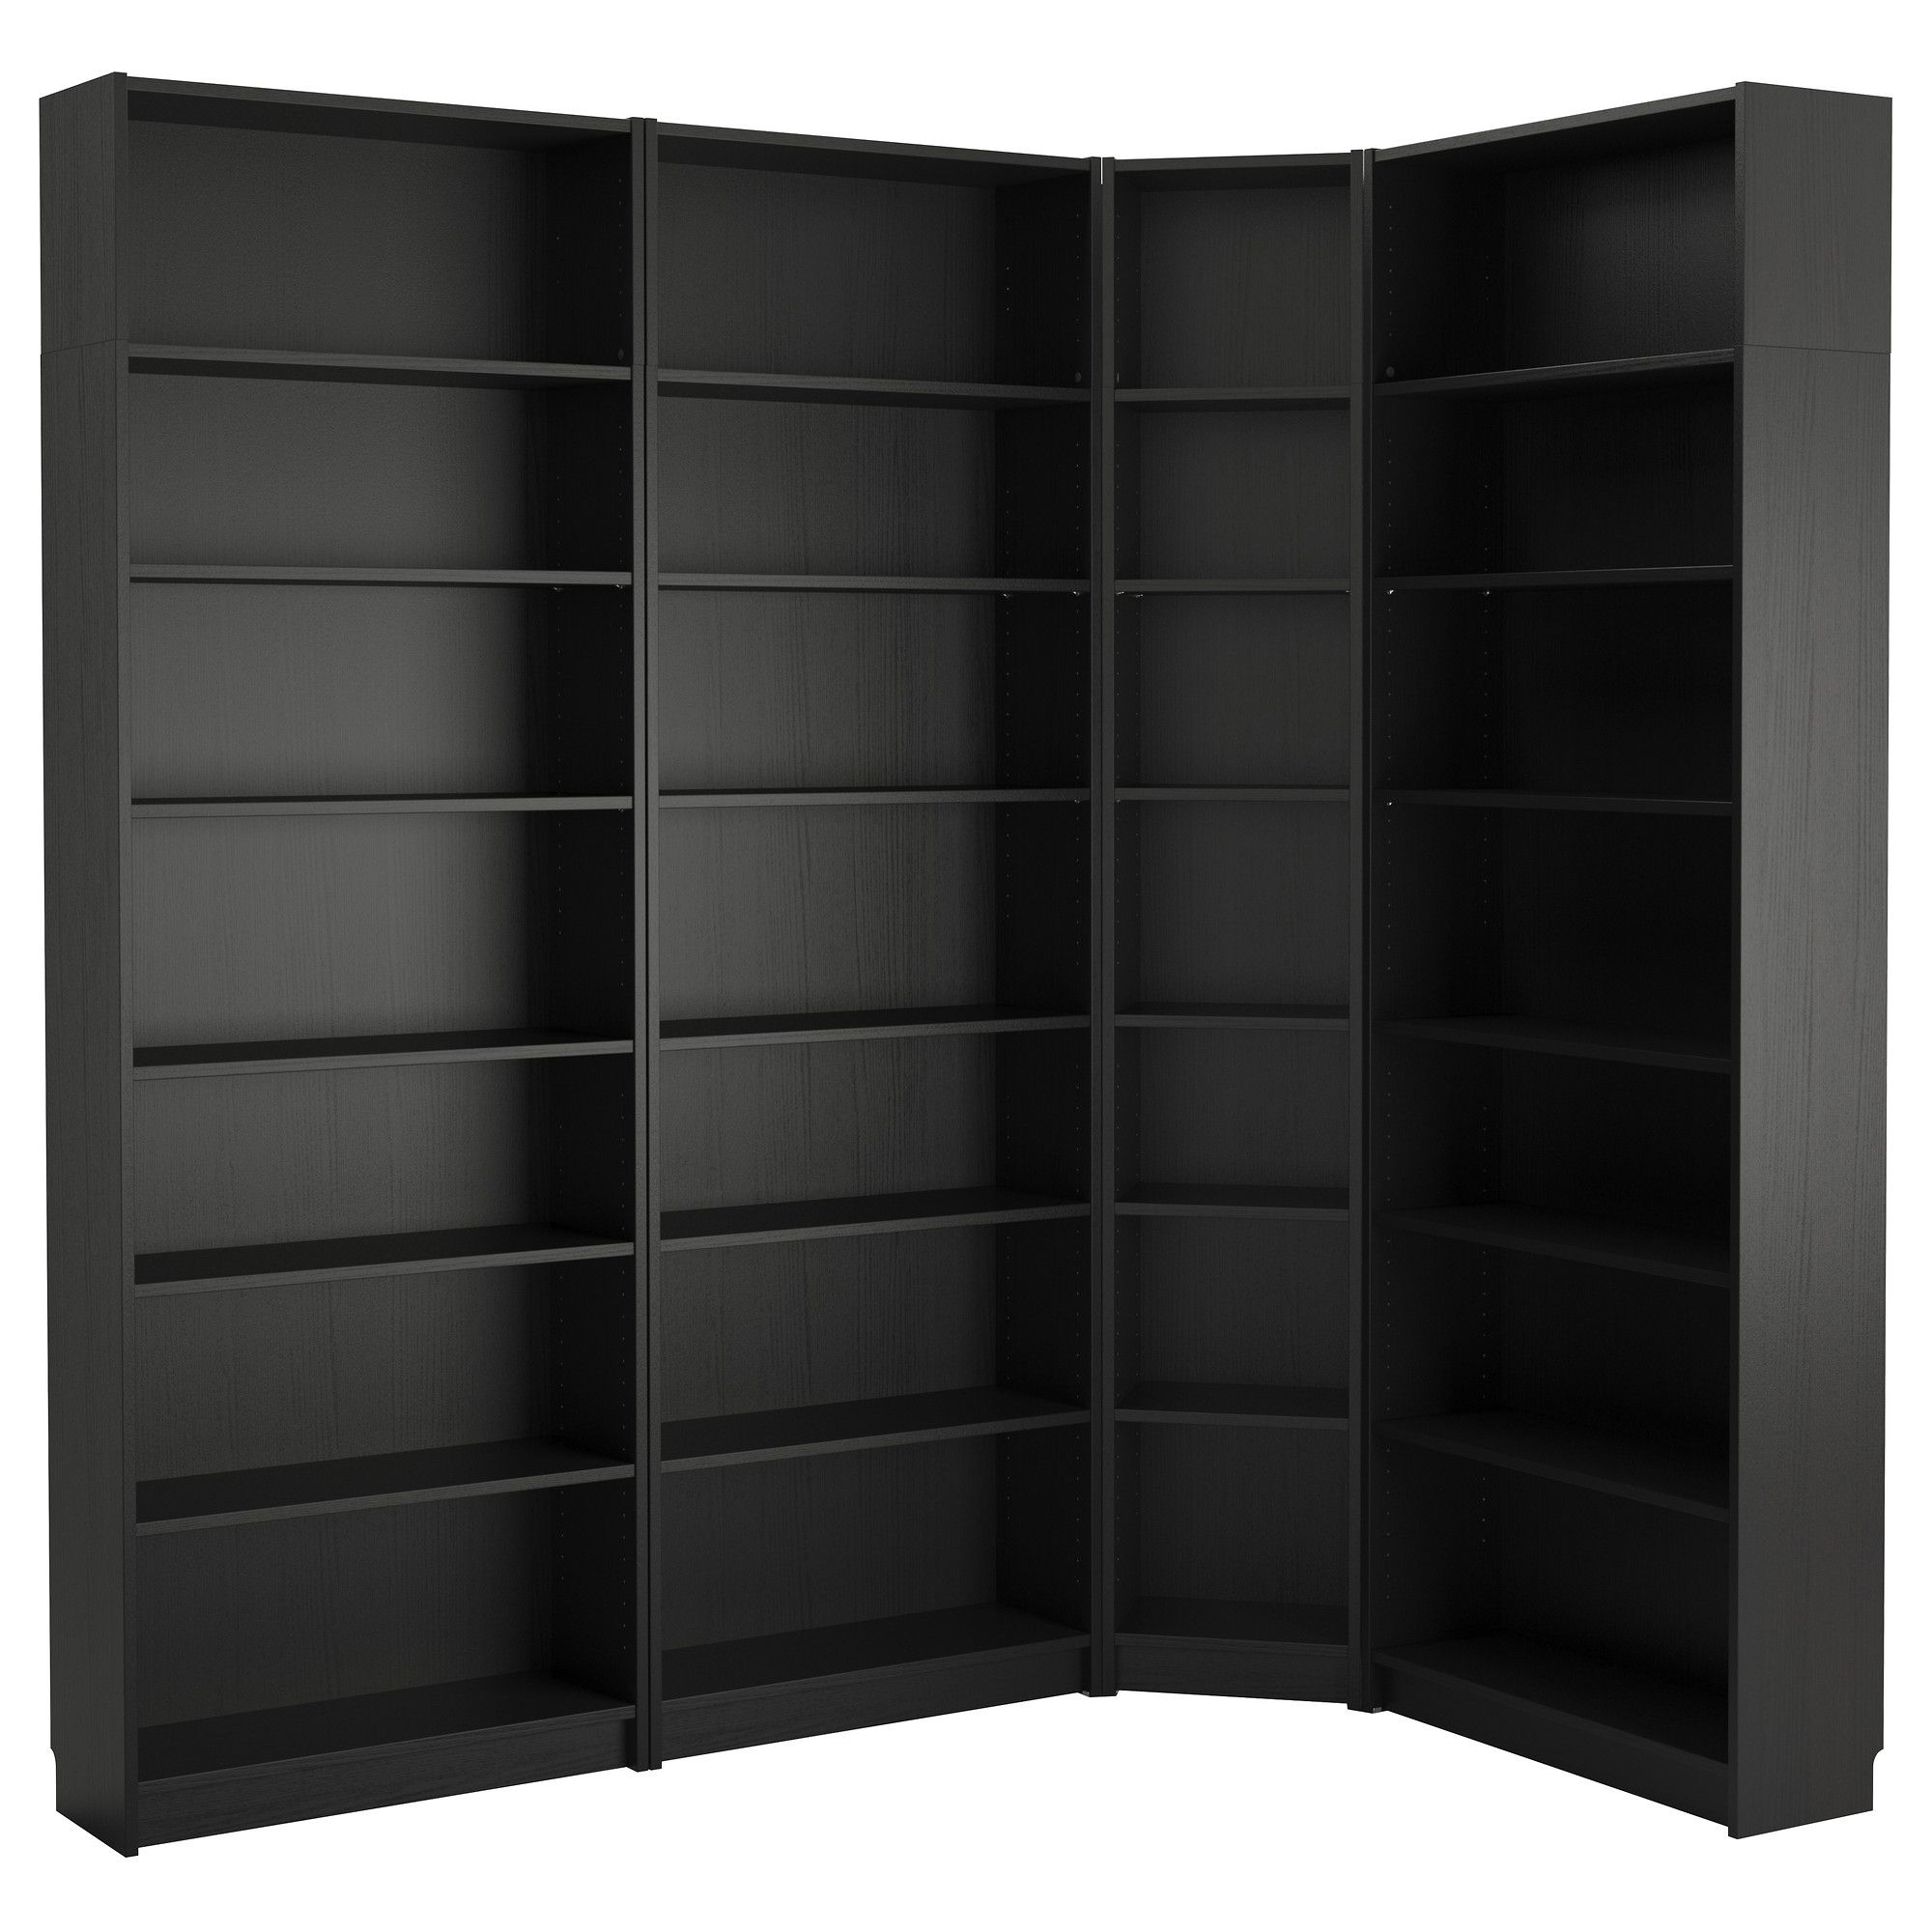 Newest Billy Bookcase – Black Brown – Ikea With Black Corner Bookcases (View 6 of 15)